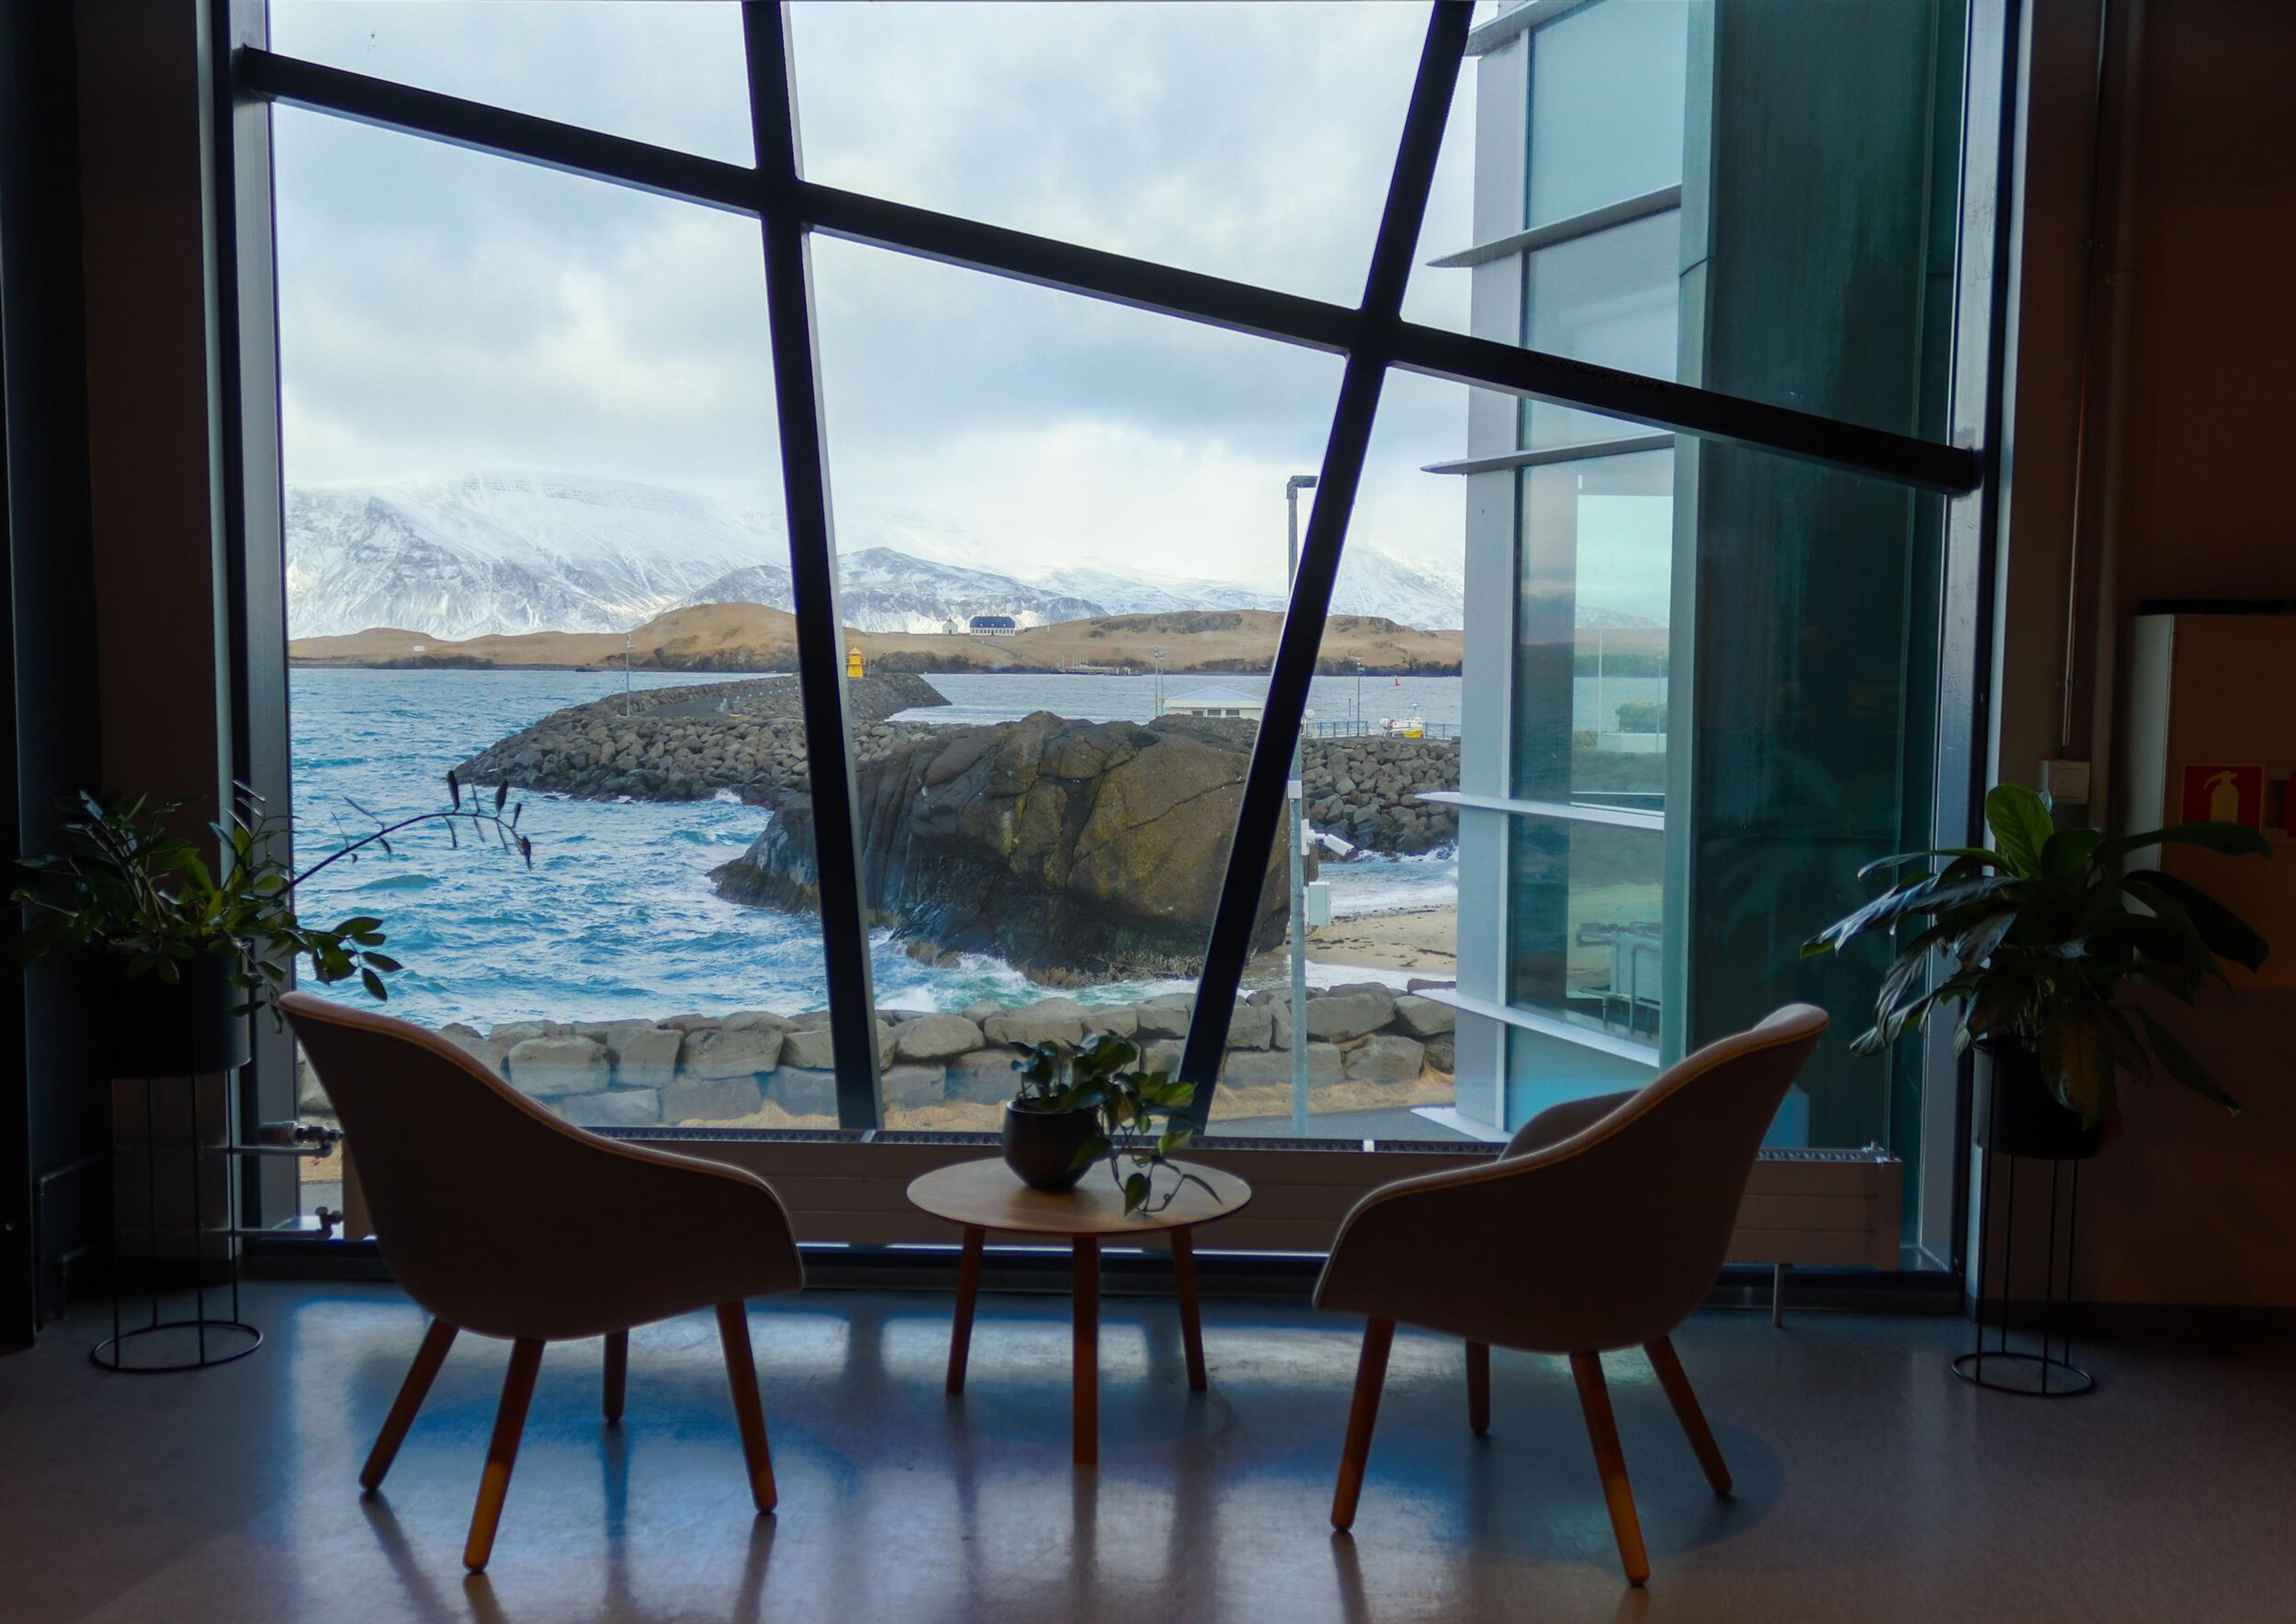  room with modern furnishings including two chairs and a table, set against floor-to-ceiling windows that showcase a rocky coastline and calm sea against a backdrop of distant mountains, under a cloudy sky.